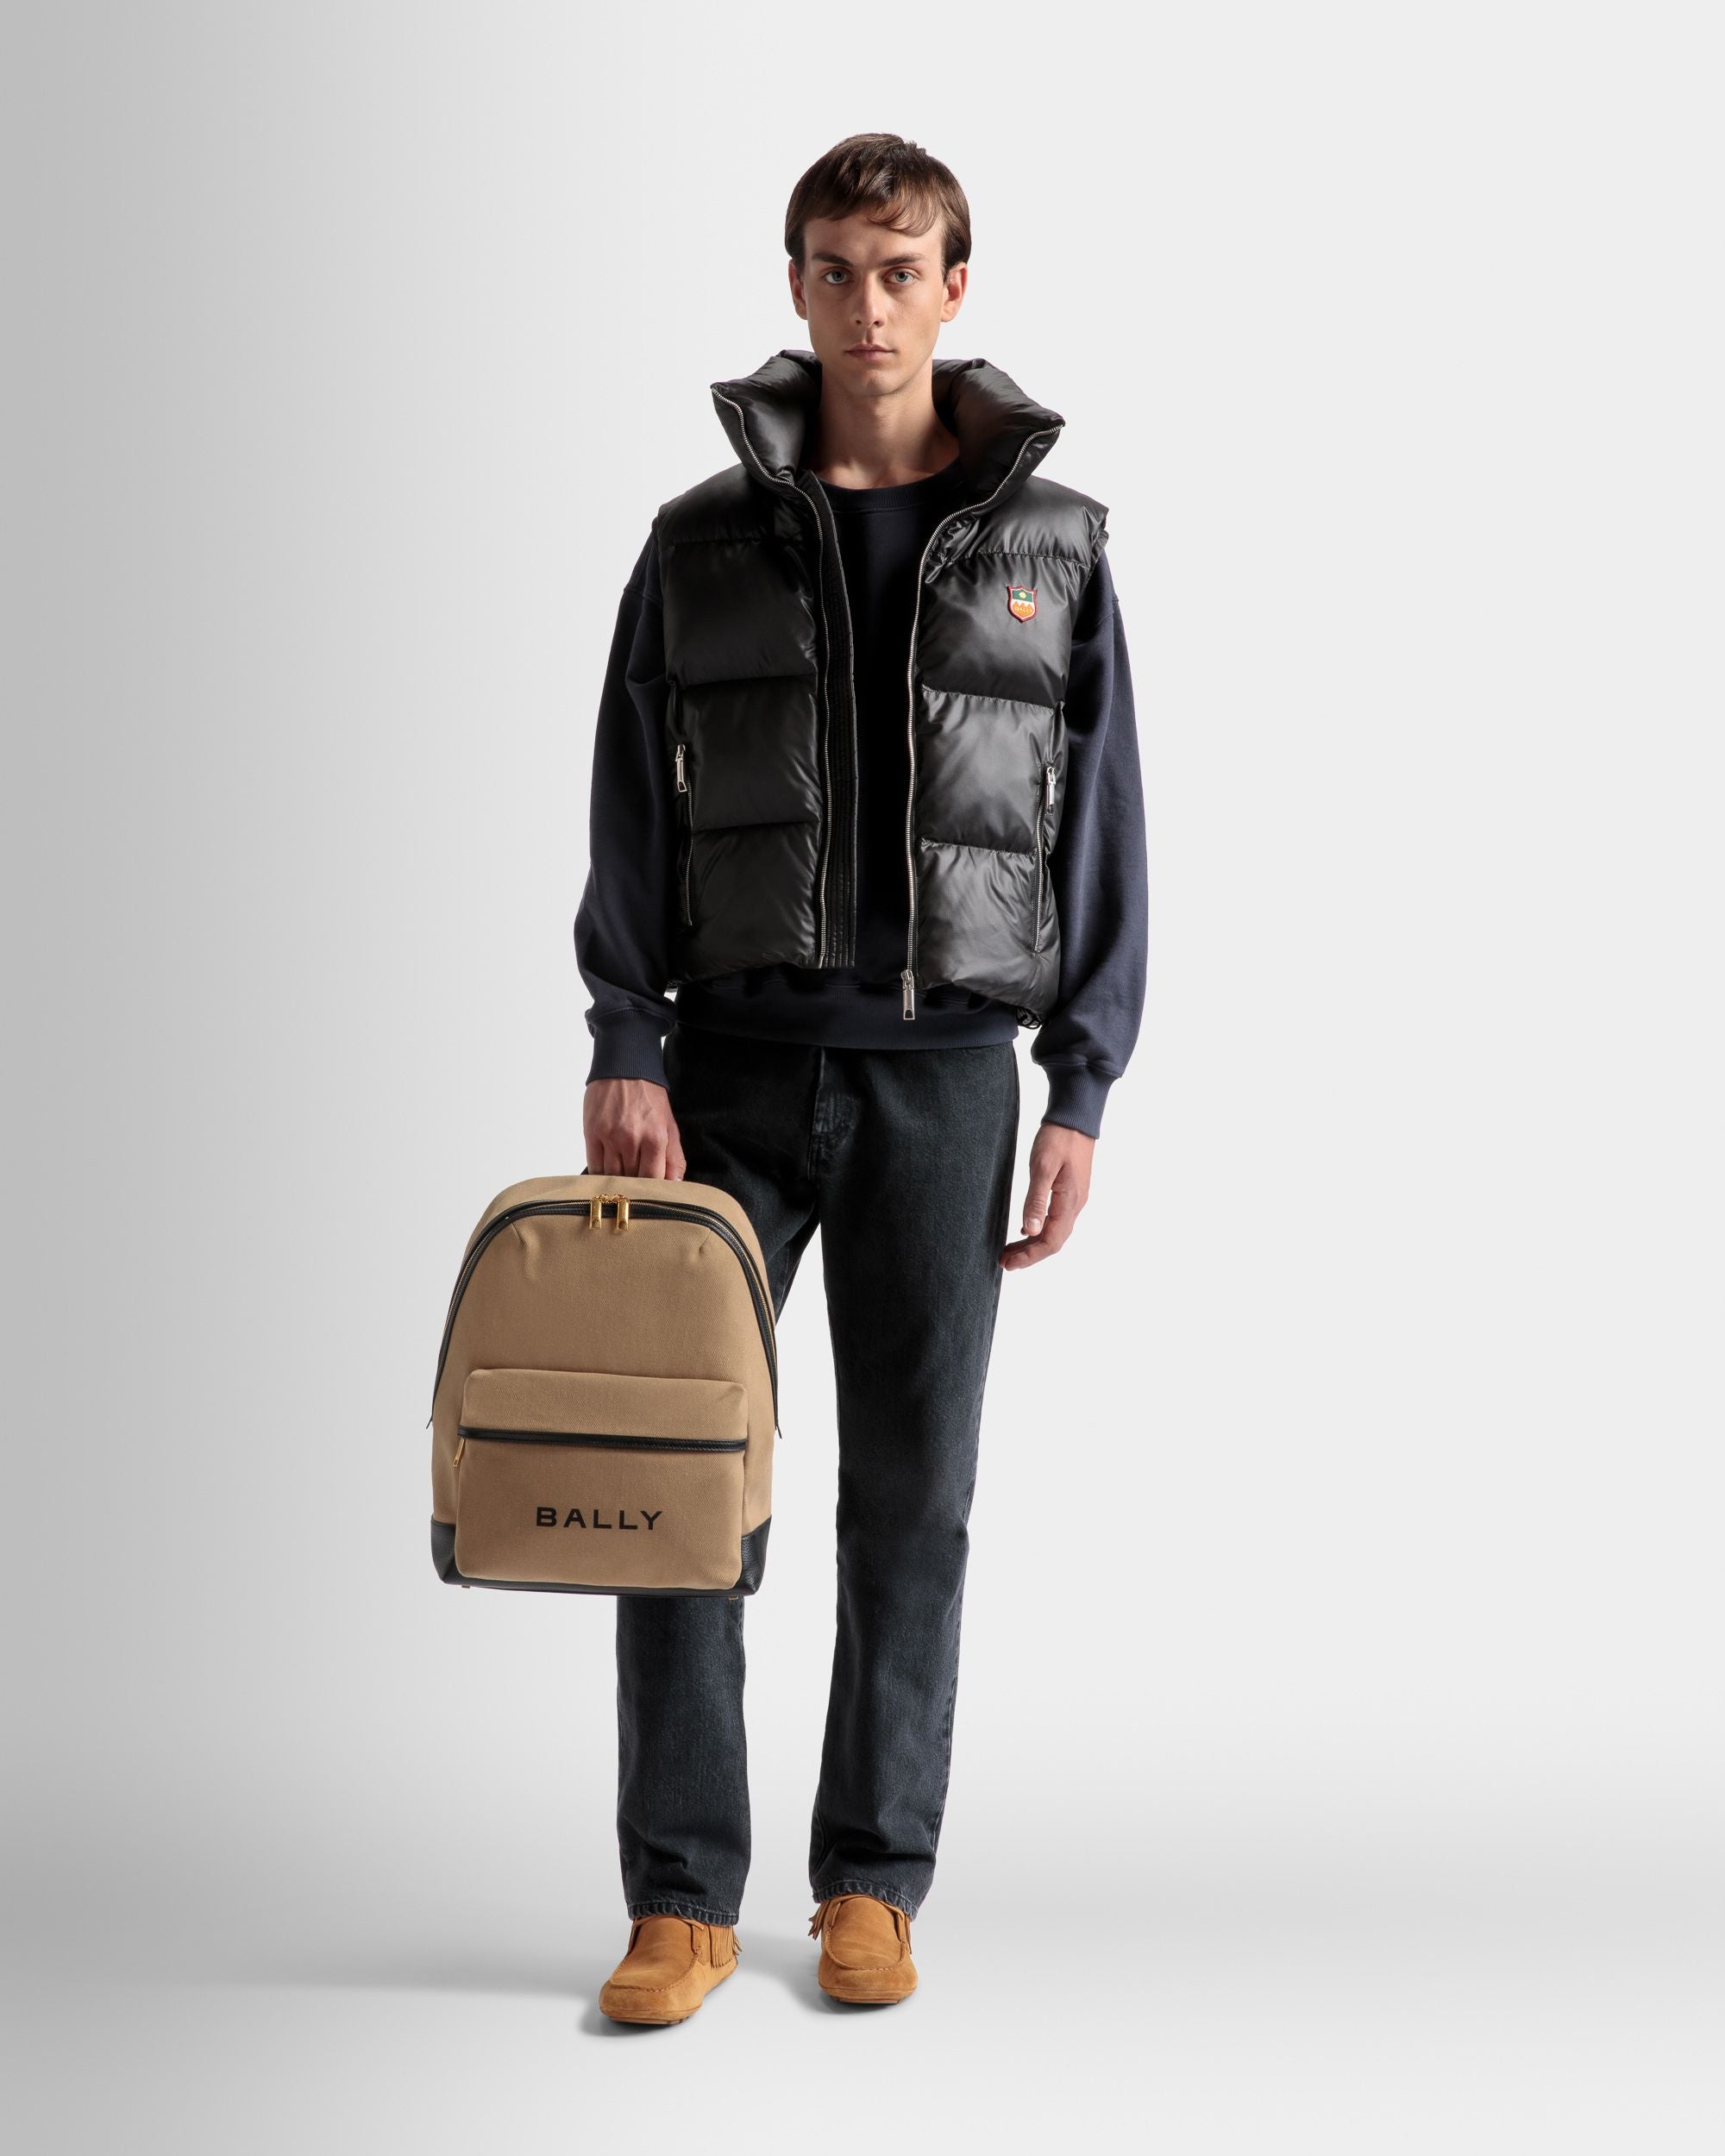 Treck | Men's Backpack | Sand And Black Fabric And Leather | Bally | On Model Front